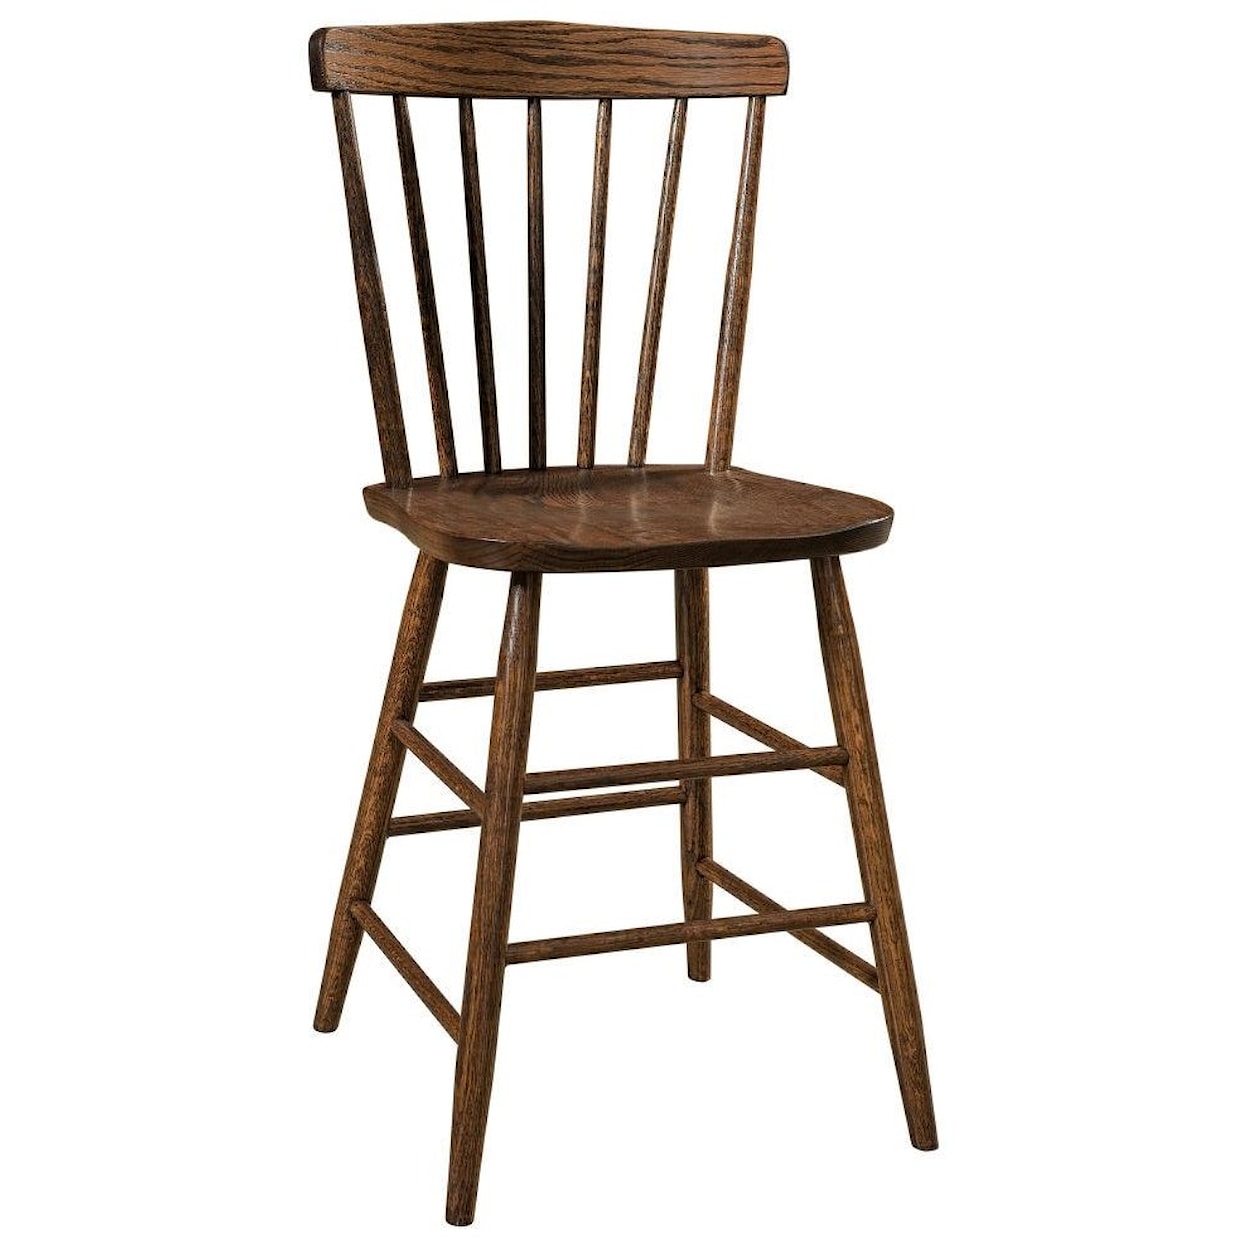 F&N Woodworking Cantaberry 24" Stationary Stool